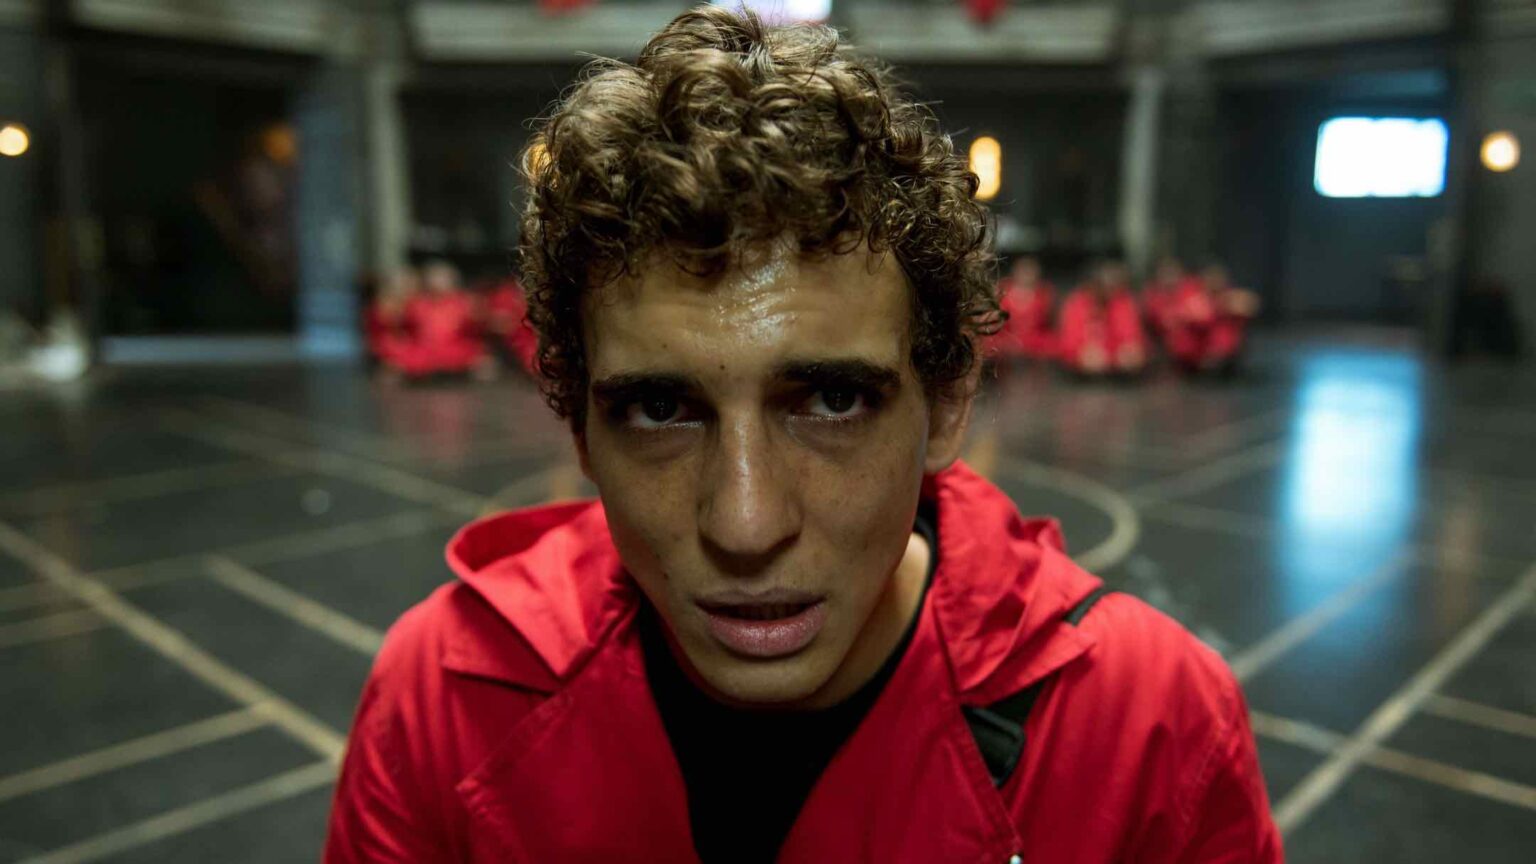 Come one, come all to see the curious theories we’ve dredged up from the internet concerning season 4 of our favorite obsession: 'Money Heist'!